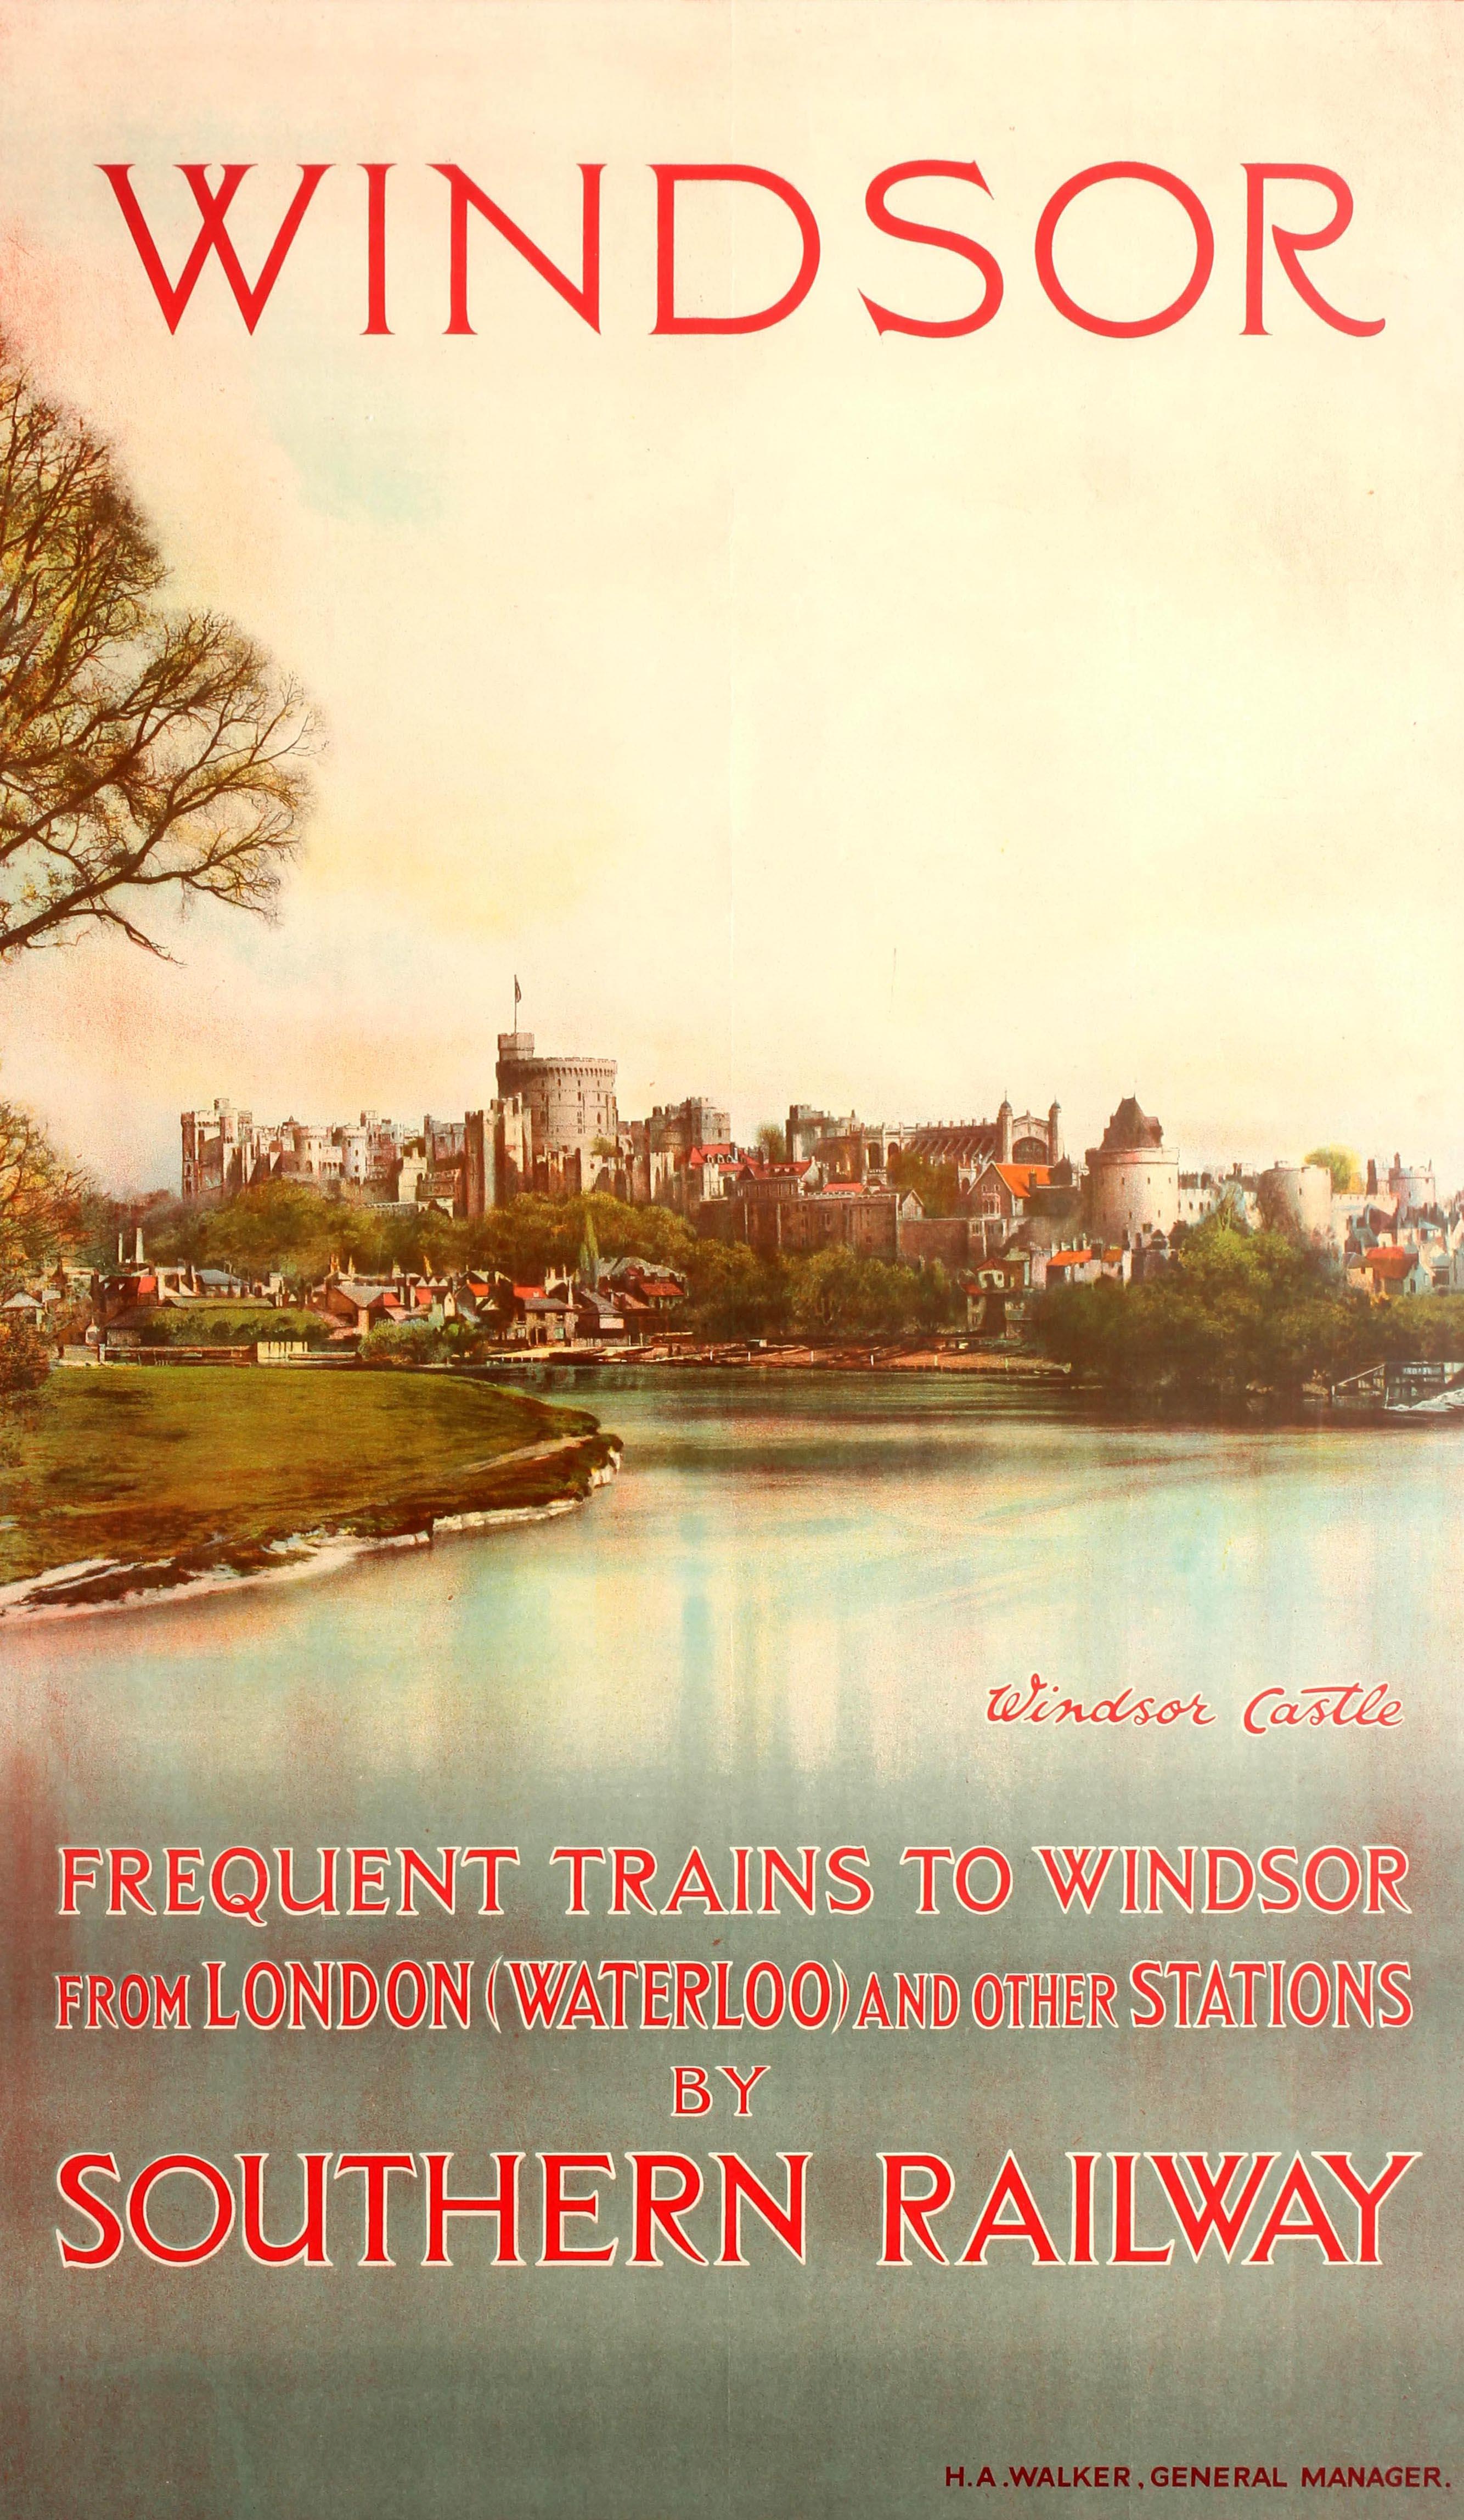 Original vintage travel advertising poster for Windsor Castle – Frequent Trains to Windsor from London (Waterloo) and other stations by Southern Railway. Great image featuring a colour photograph of Windsor Castle and the historical town of Windsor